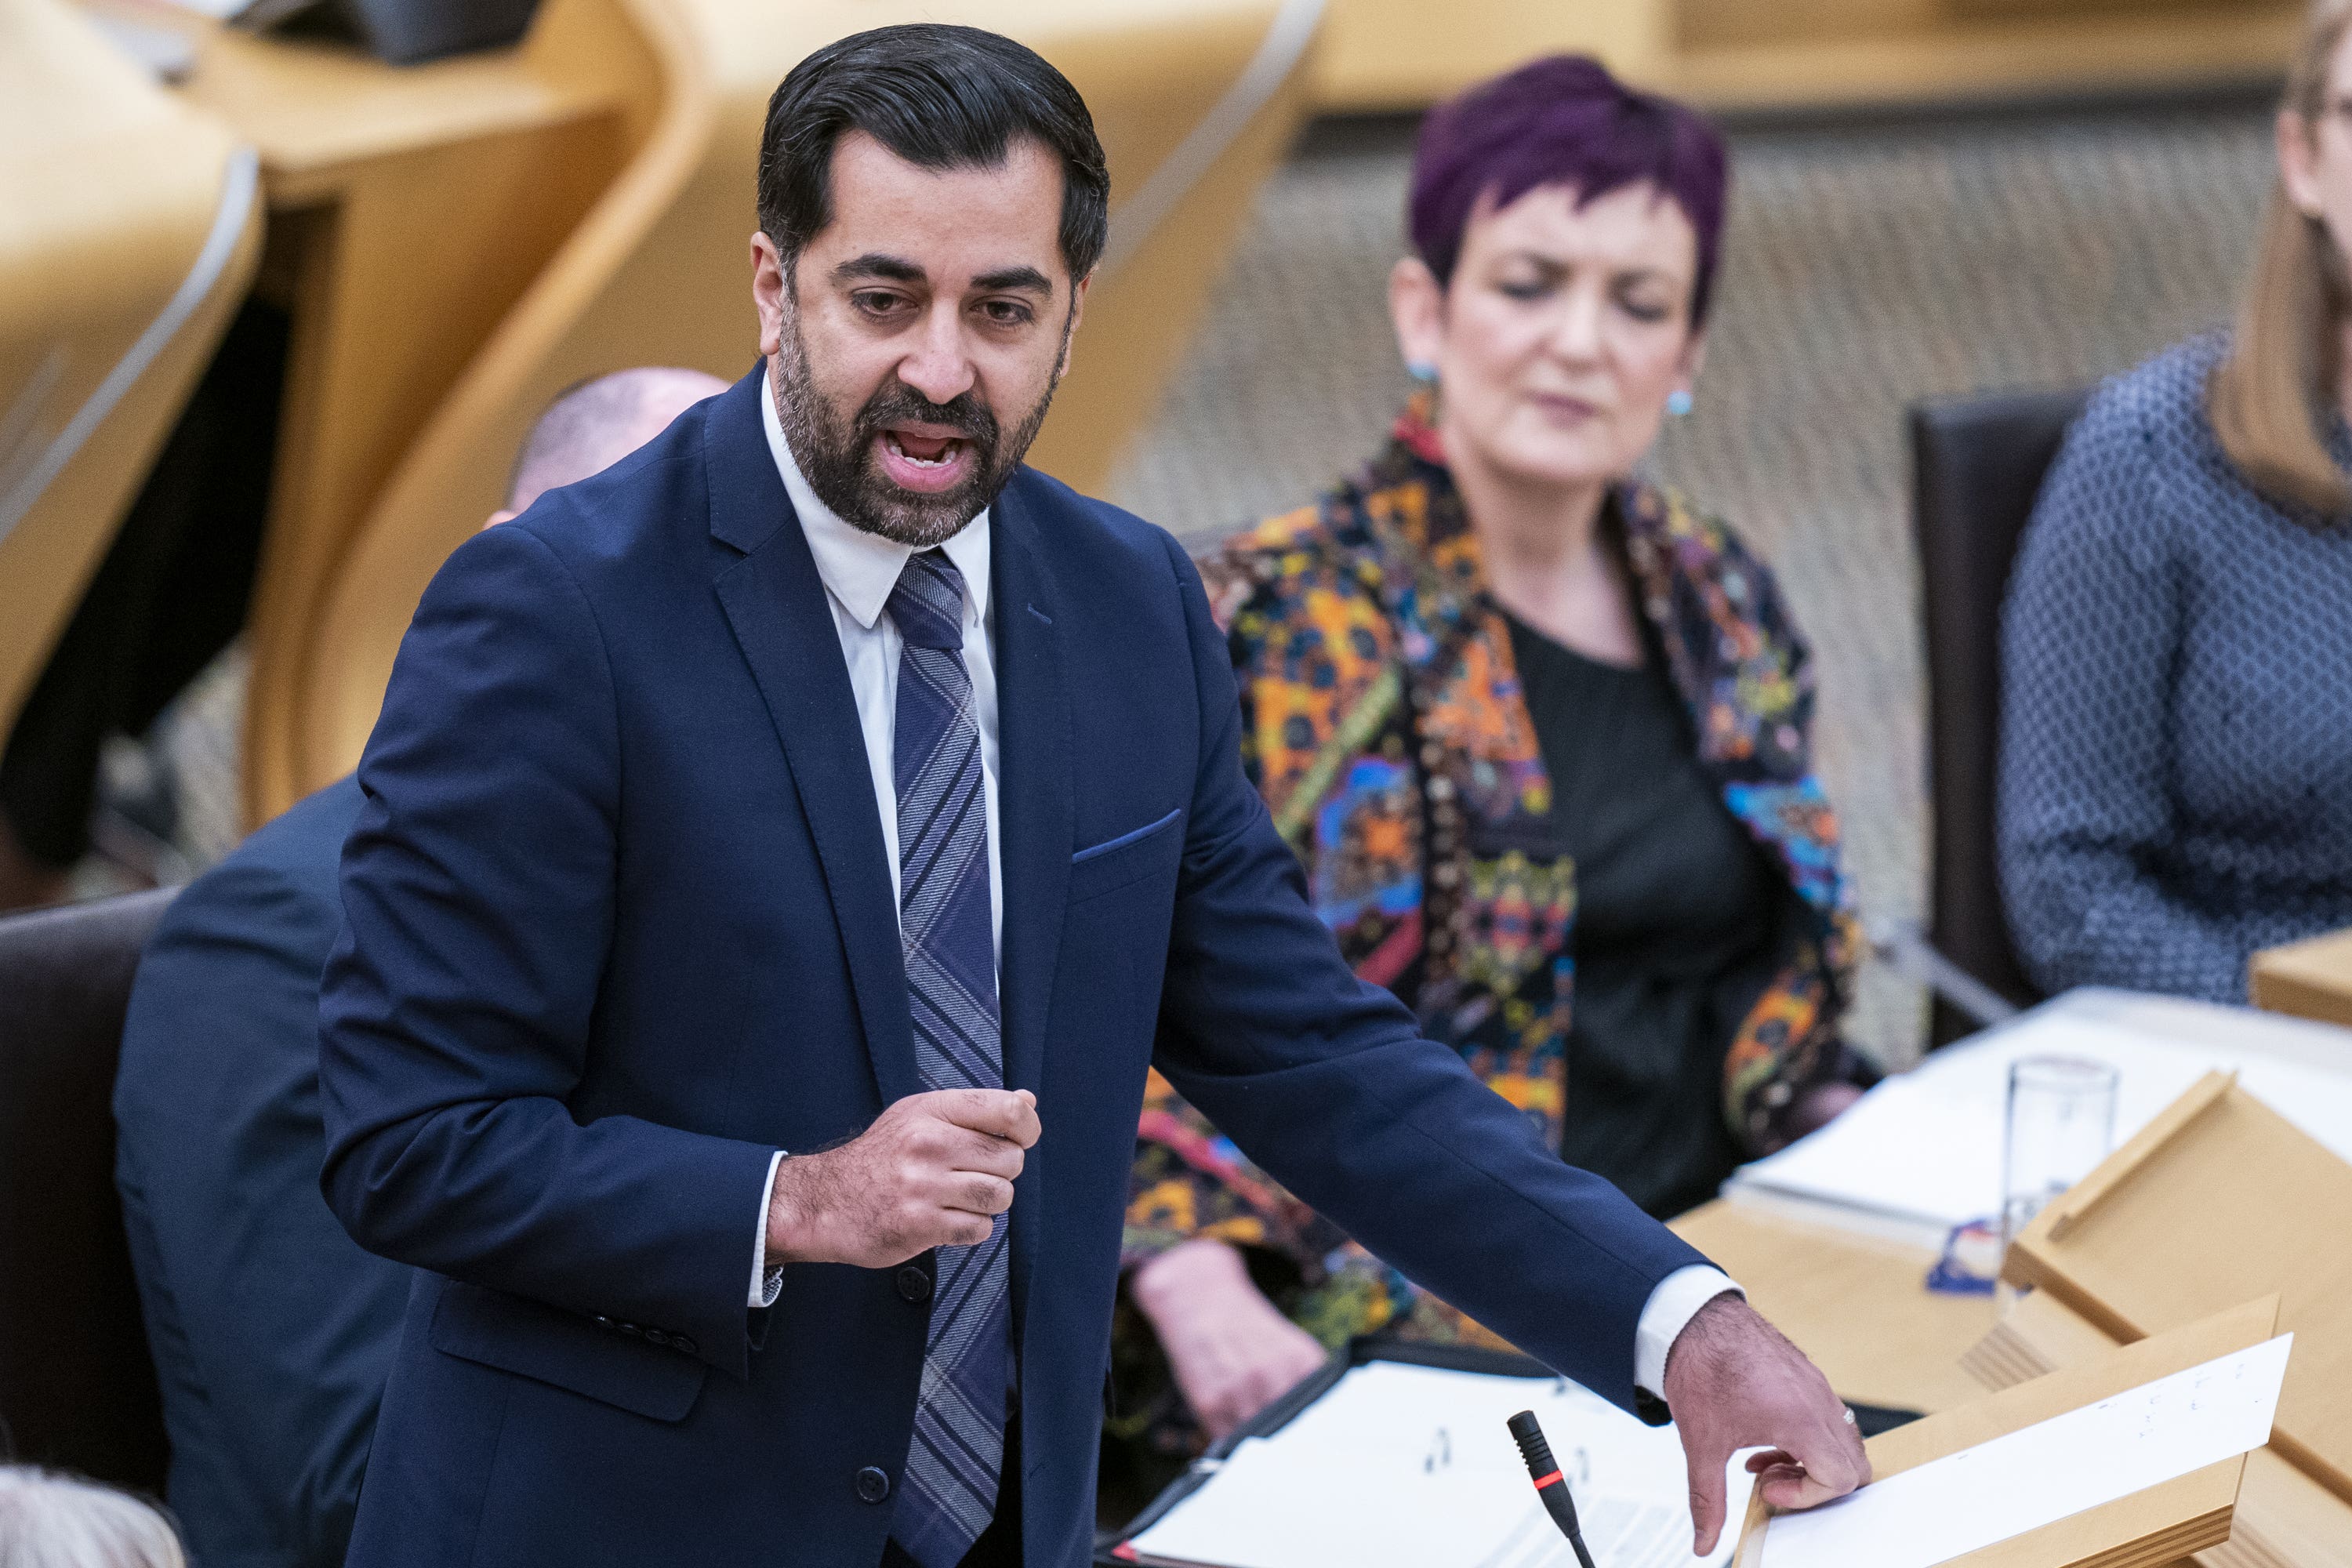 Humza Yousaf says there is ‘disinformation’ surrounding the law.